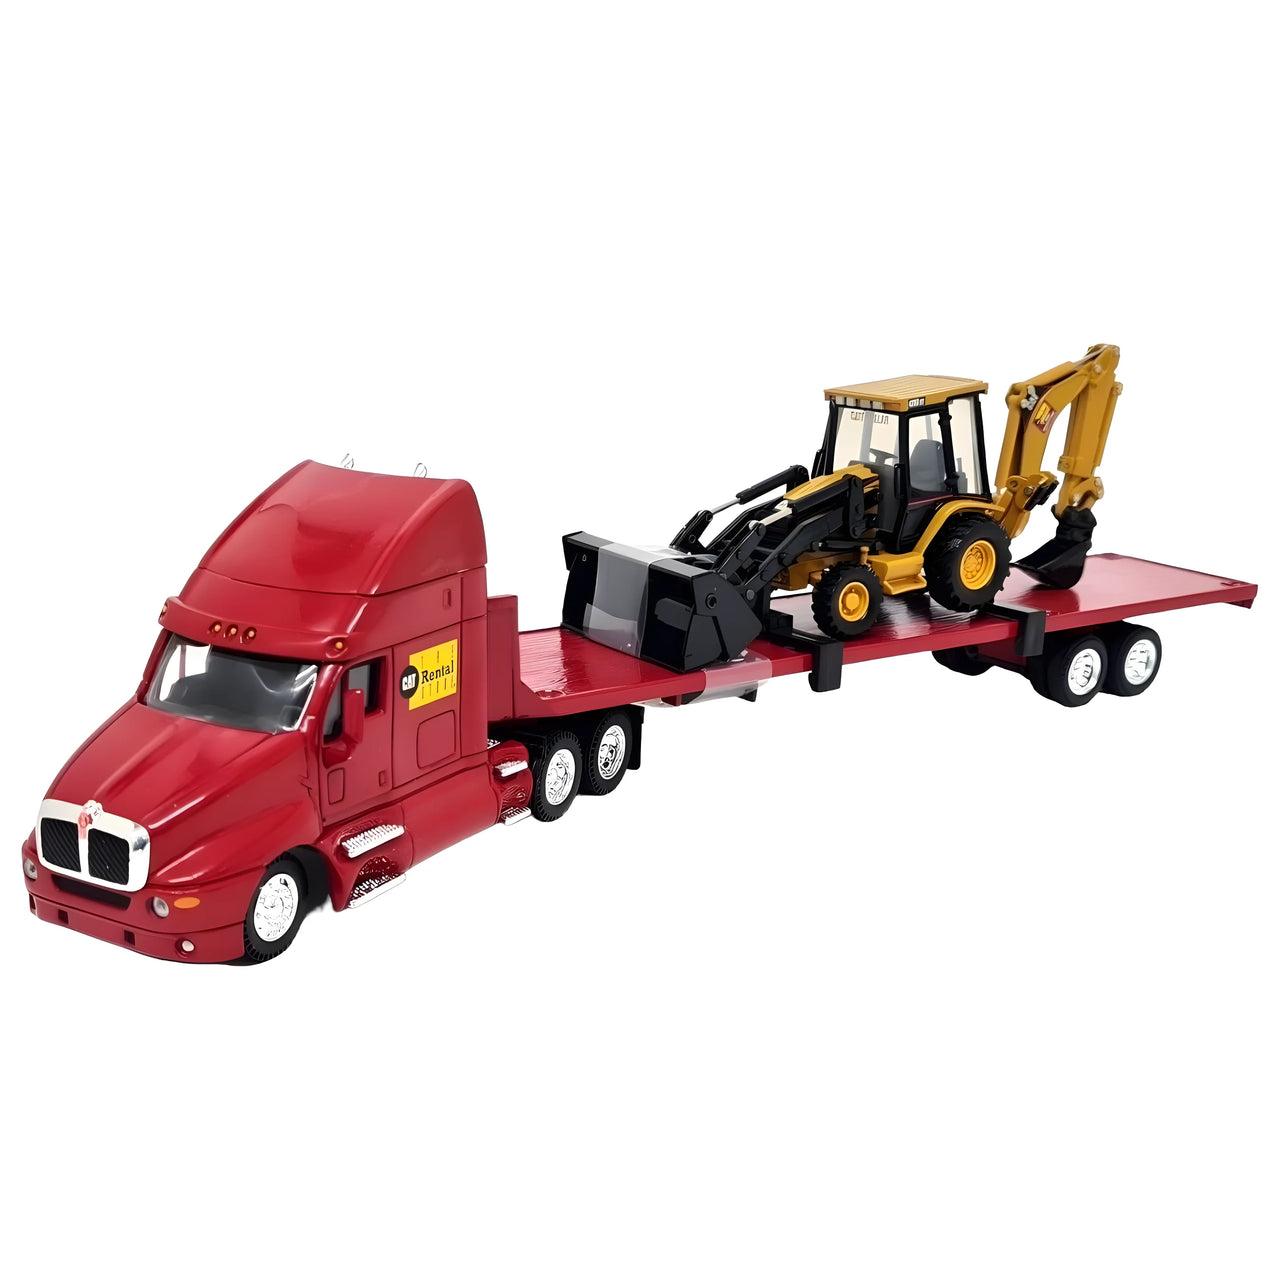 55117 Caterpillar Low Bed &amp; Caterpillar 420D IT Backhoe 1:50 Scale (Discontinued Model)